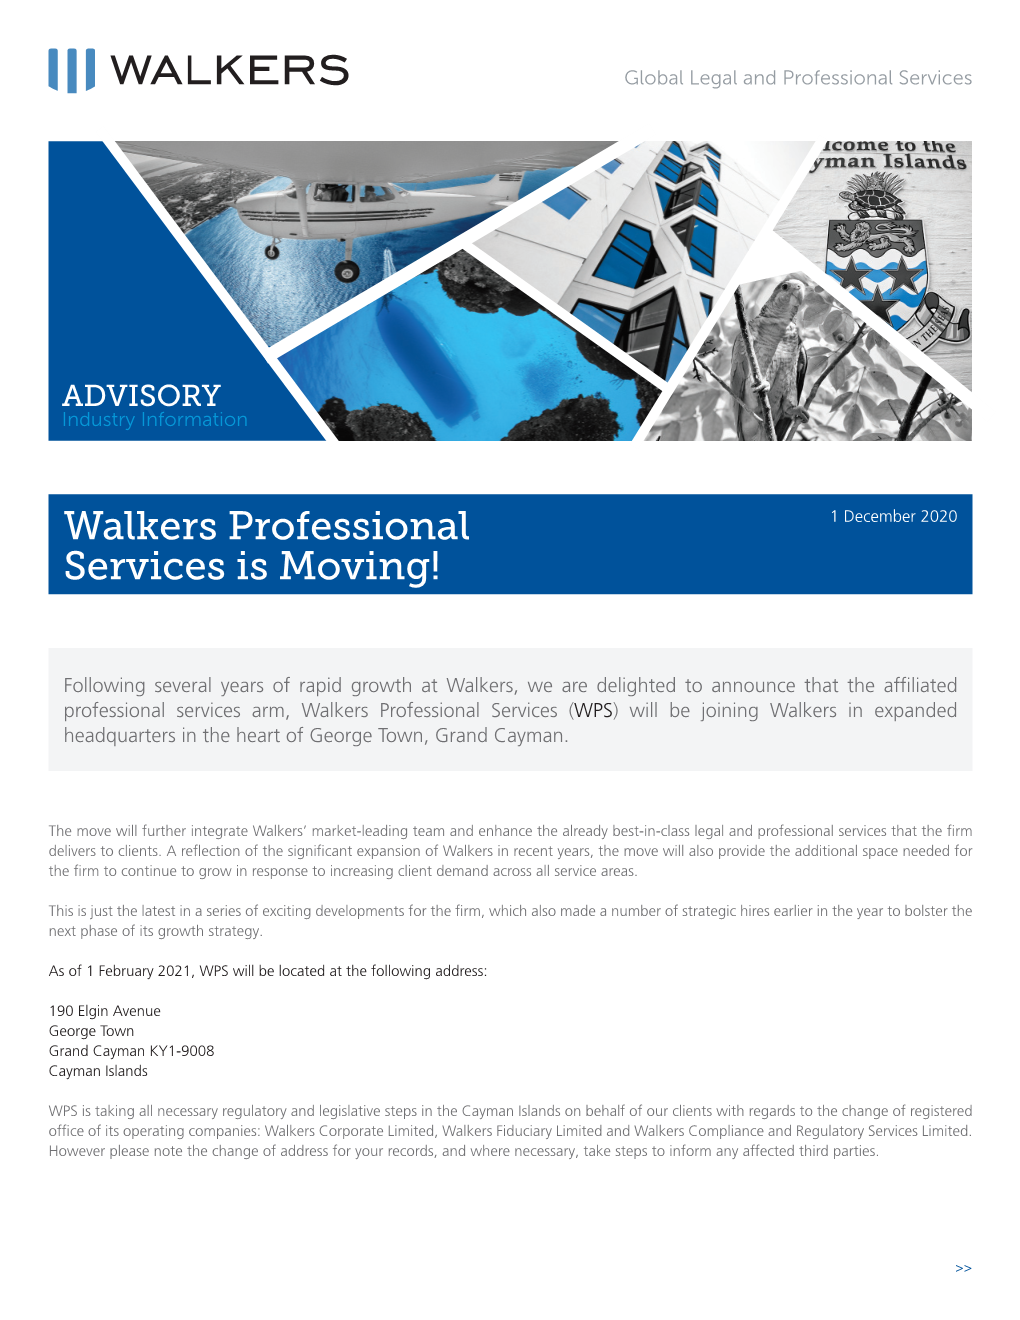 Walkers Professional Services Is Moving!